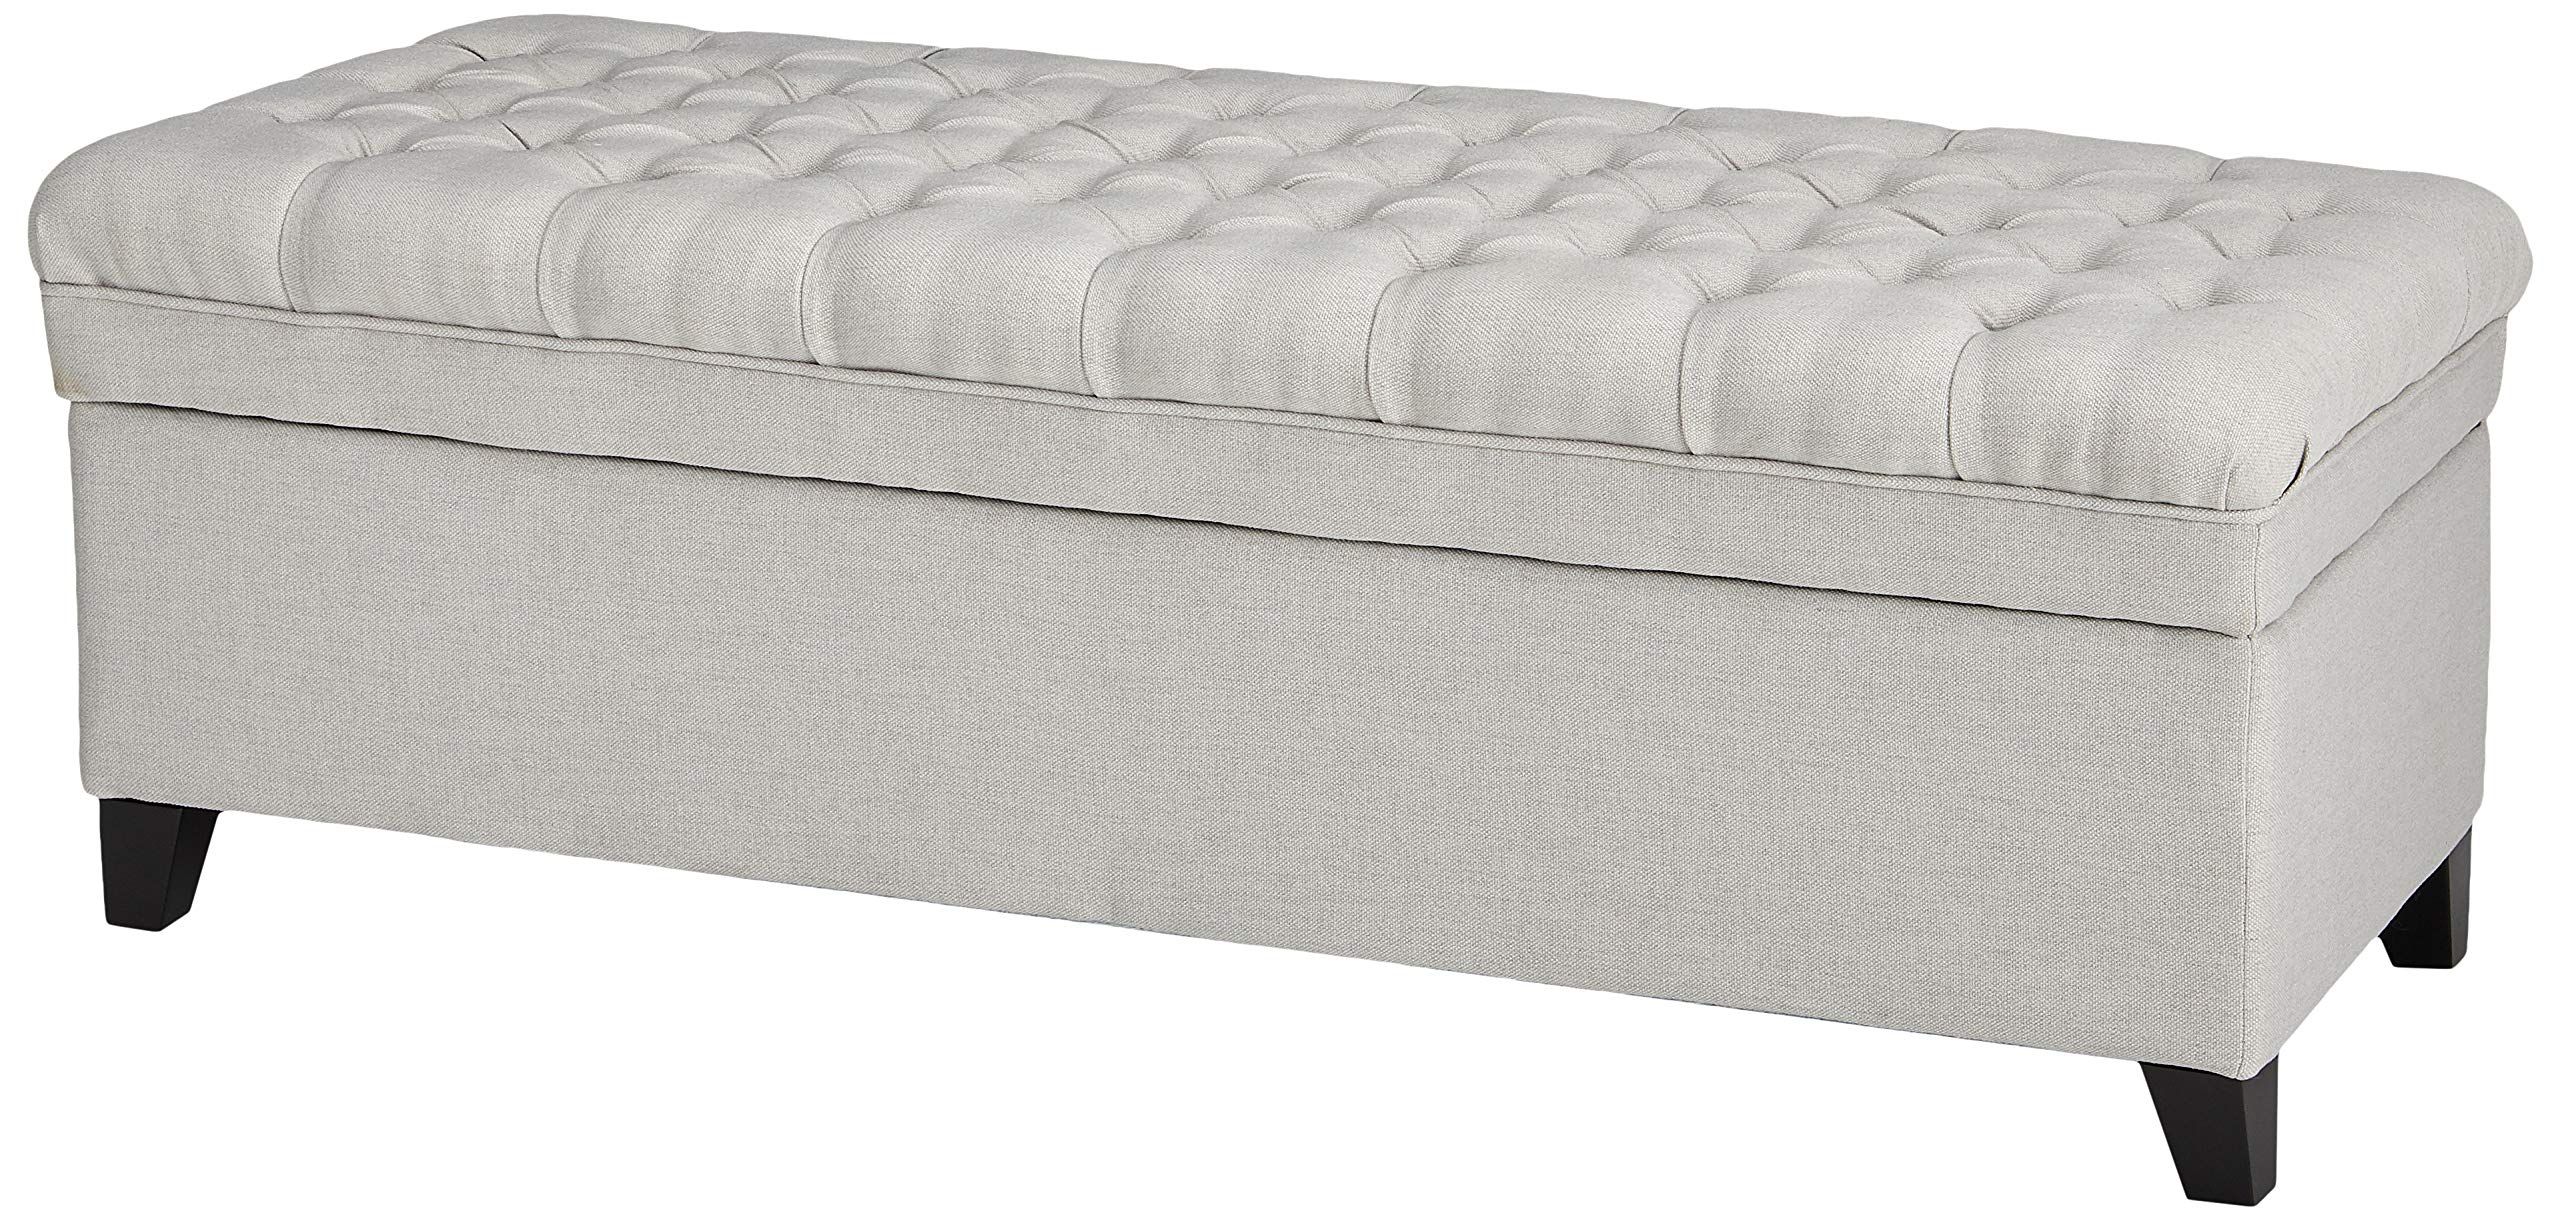 Most Up To Date Amazon: Christopher Knight Home Juliana Fabric Storage Ottoman, Light  Gray : Home & Kitchen Intended For Light Gray Ottomans (View 5 of 10)